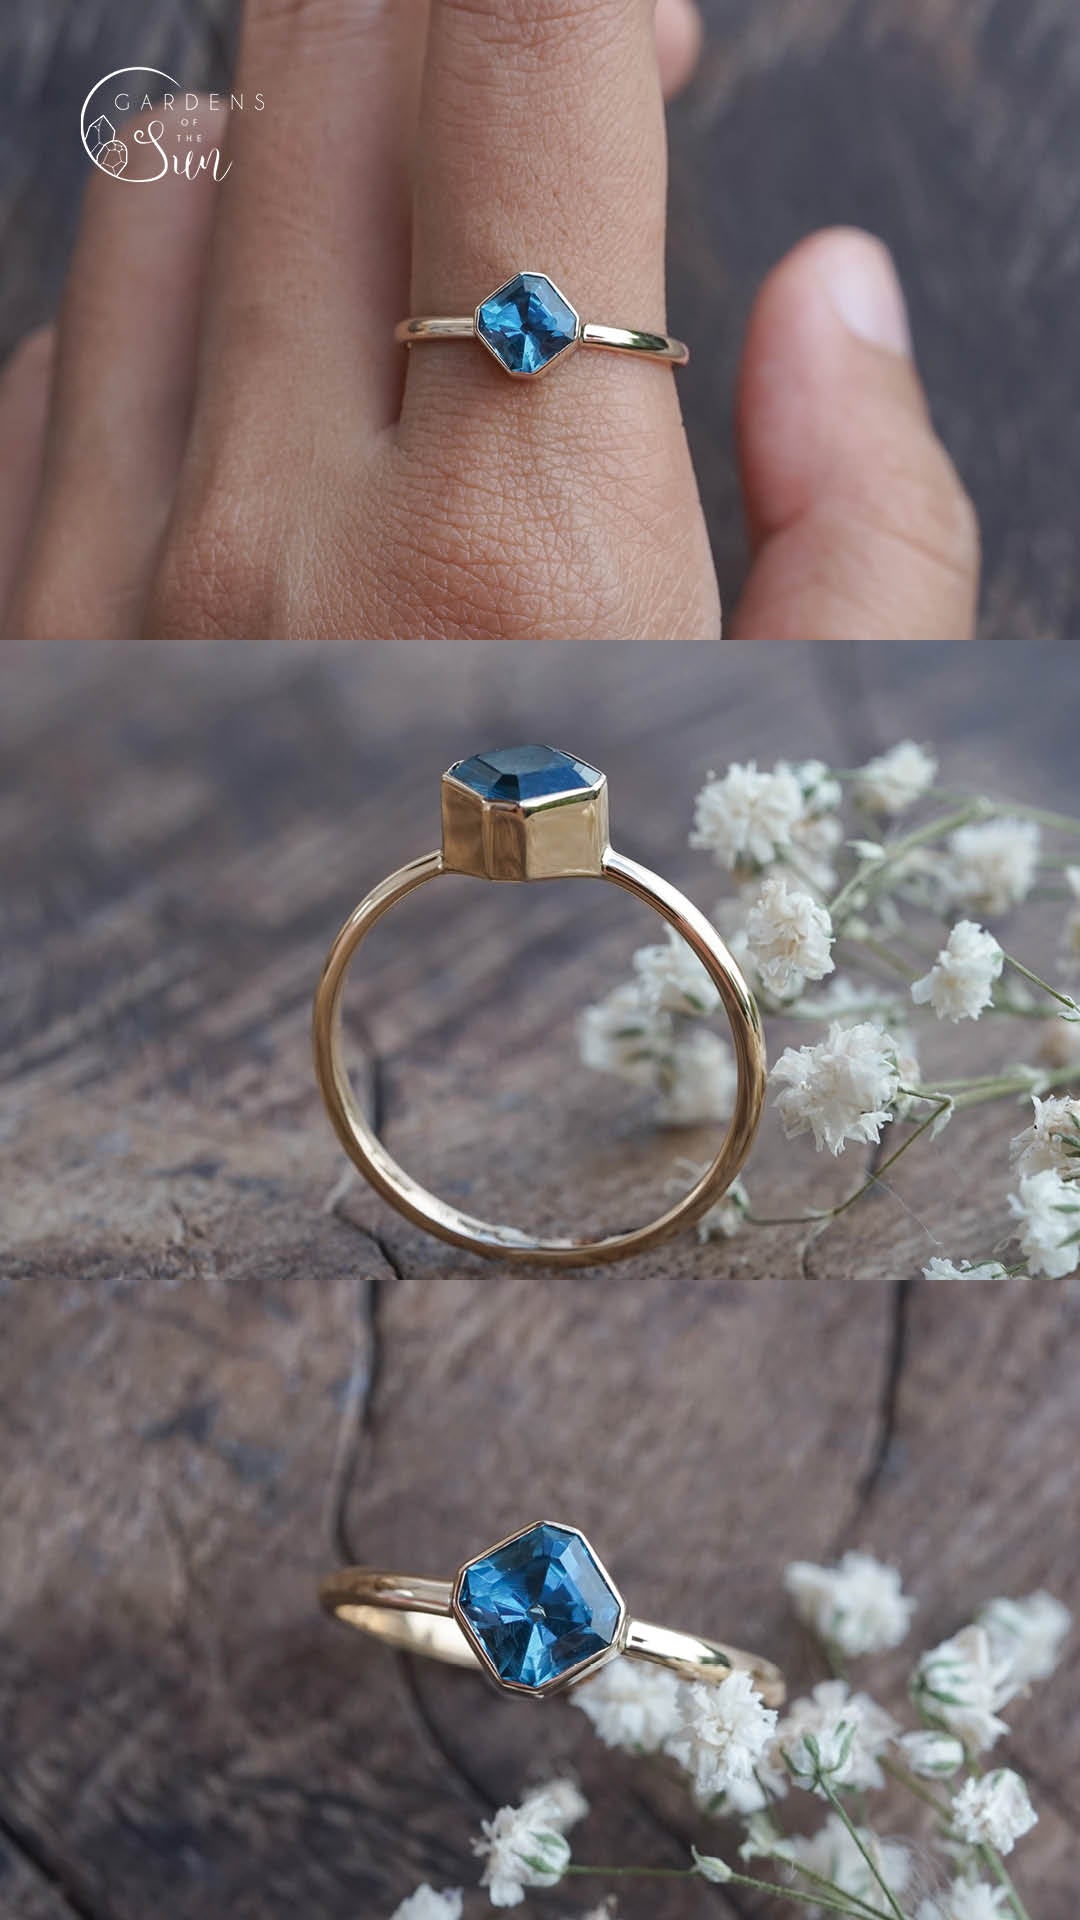 Custom Topaz Ring in Gold - Gardens of the Sun | Ethical Jewelry